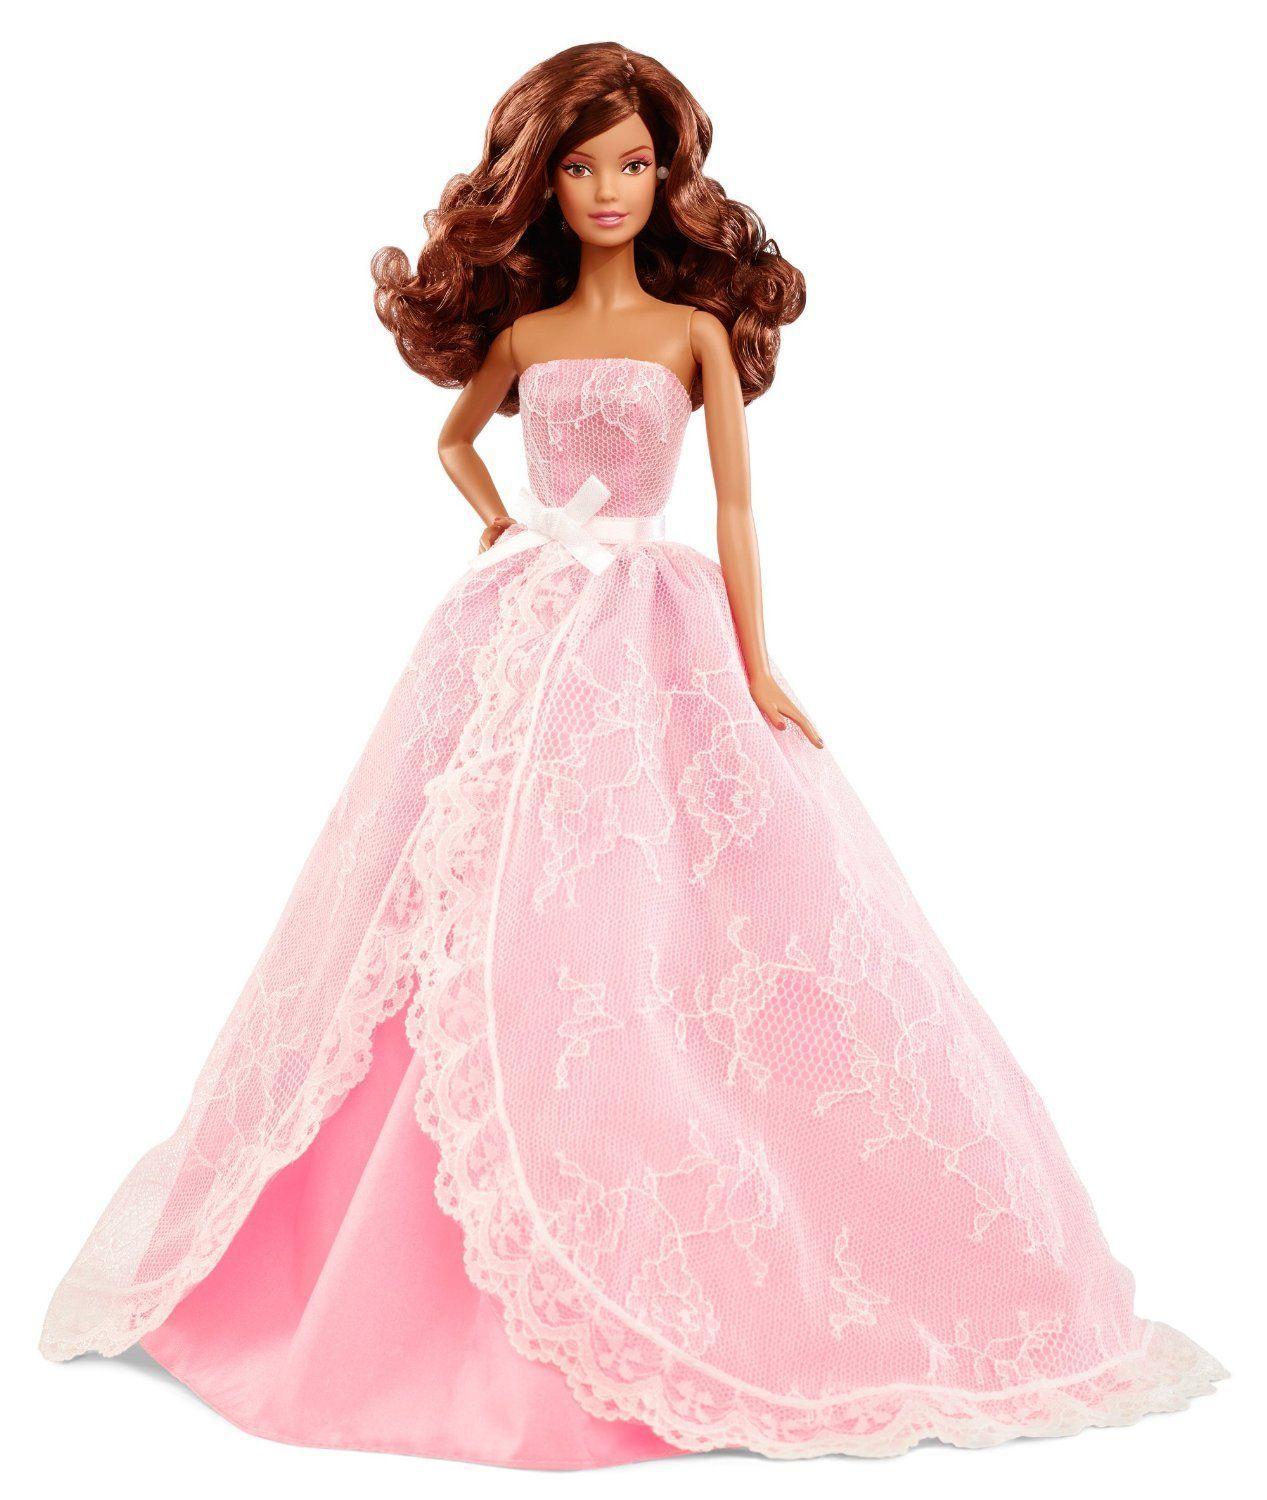 My Dolls - A Blog About Barbie and Other Fashion Dolls Barbie news